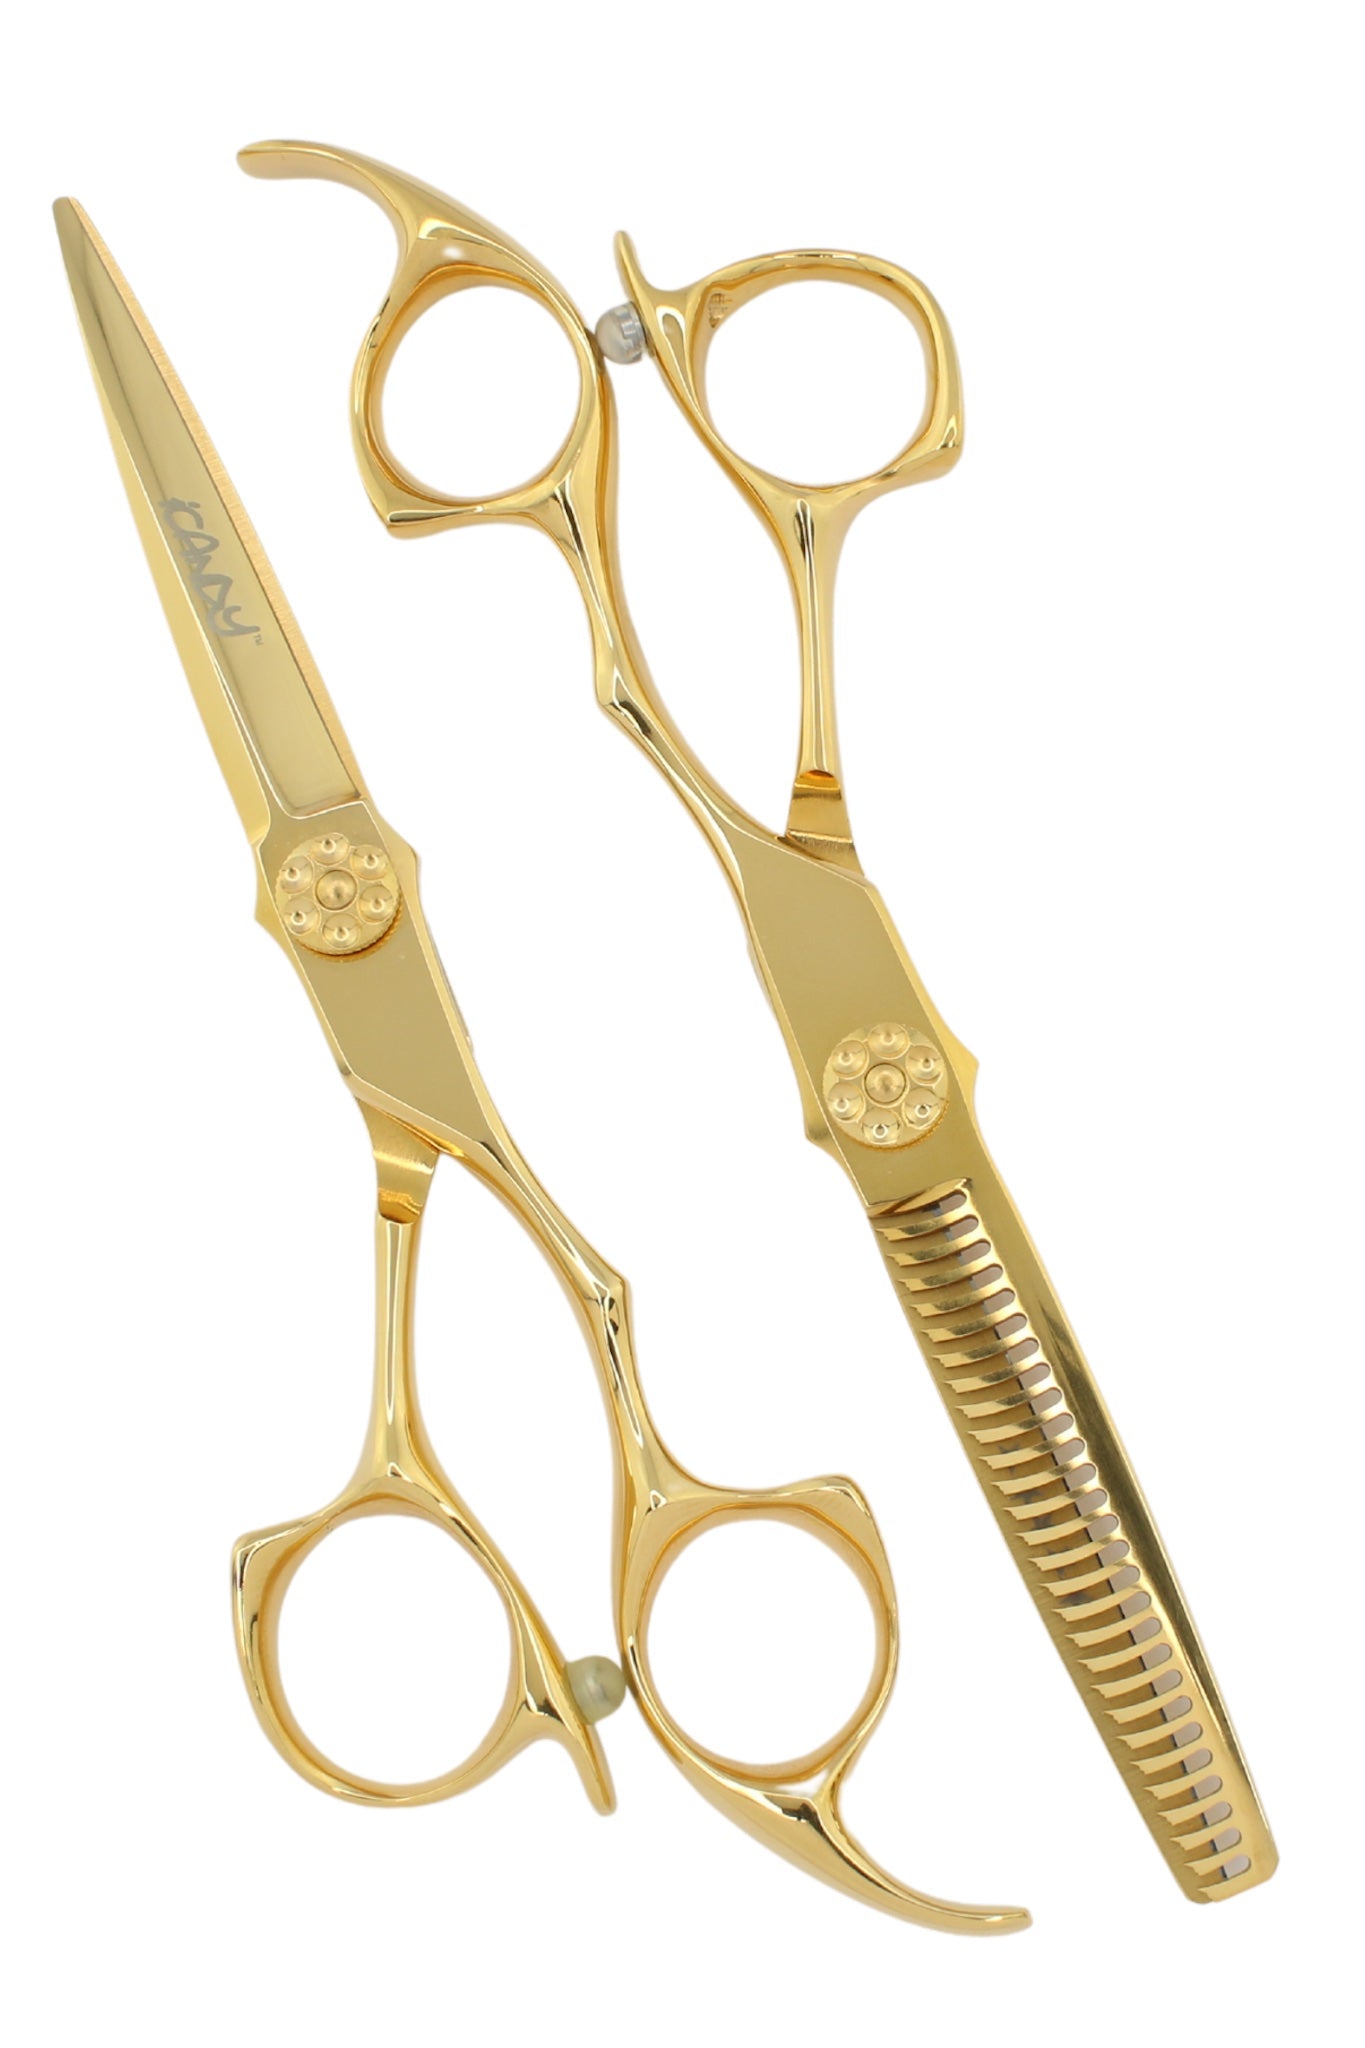 iCandy ALL STAR Yellow Gold Scissor-Thinner Bundle 6.0 inch